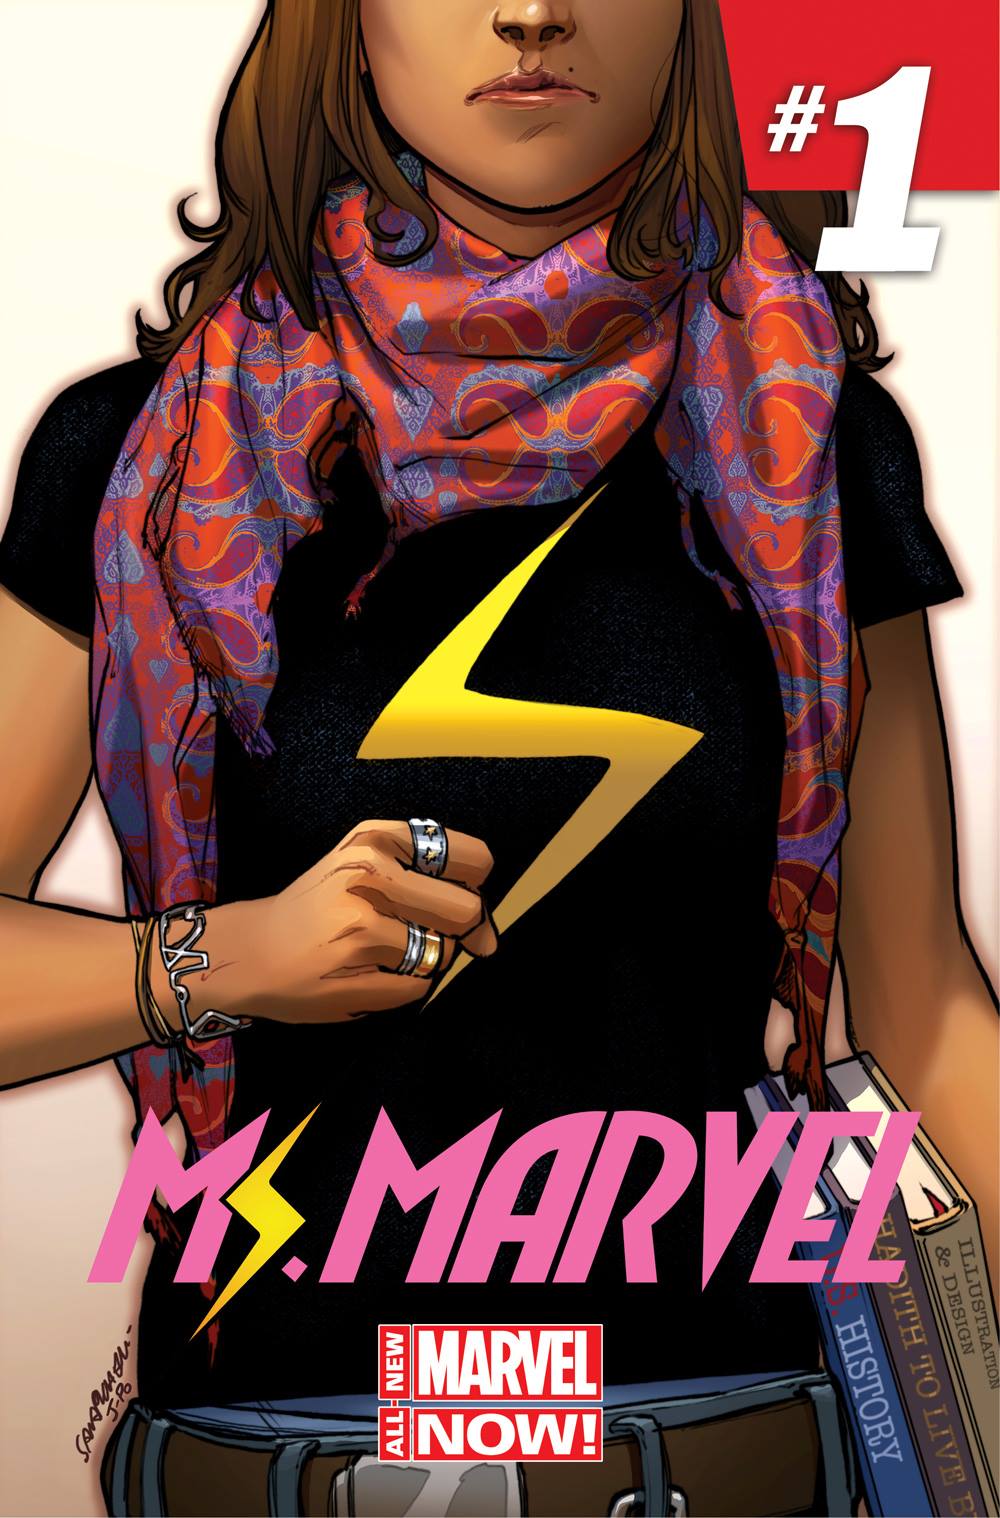 Ms. Marvel (2014) #1 cover